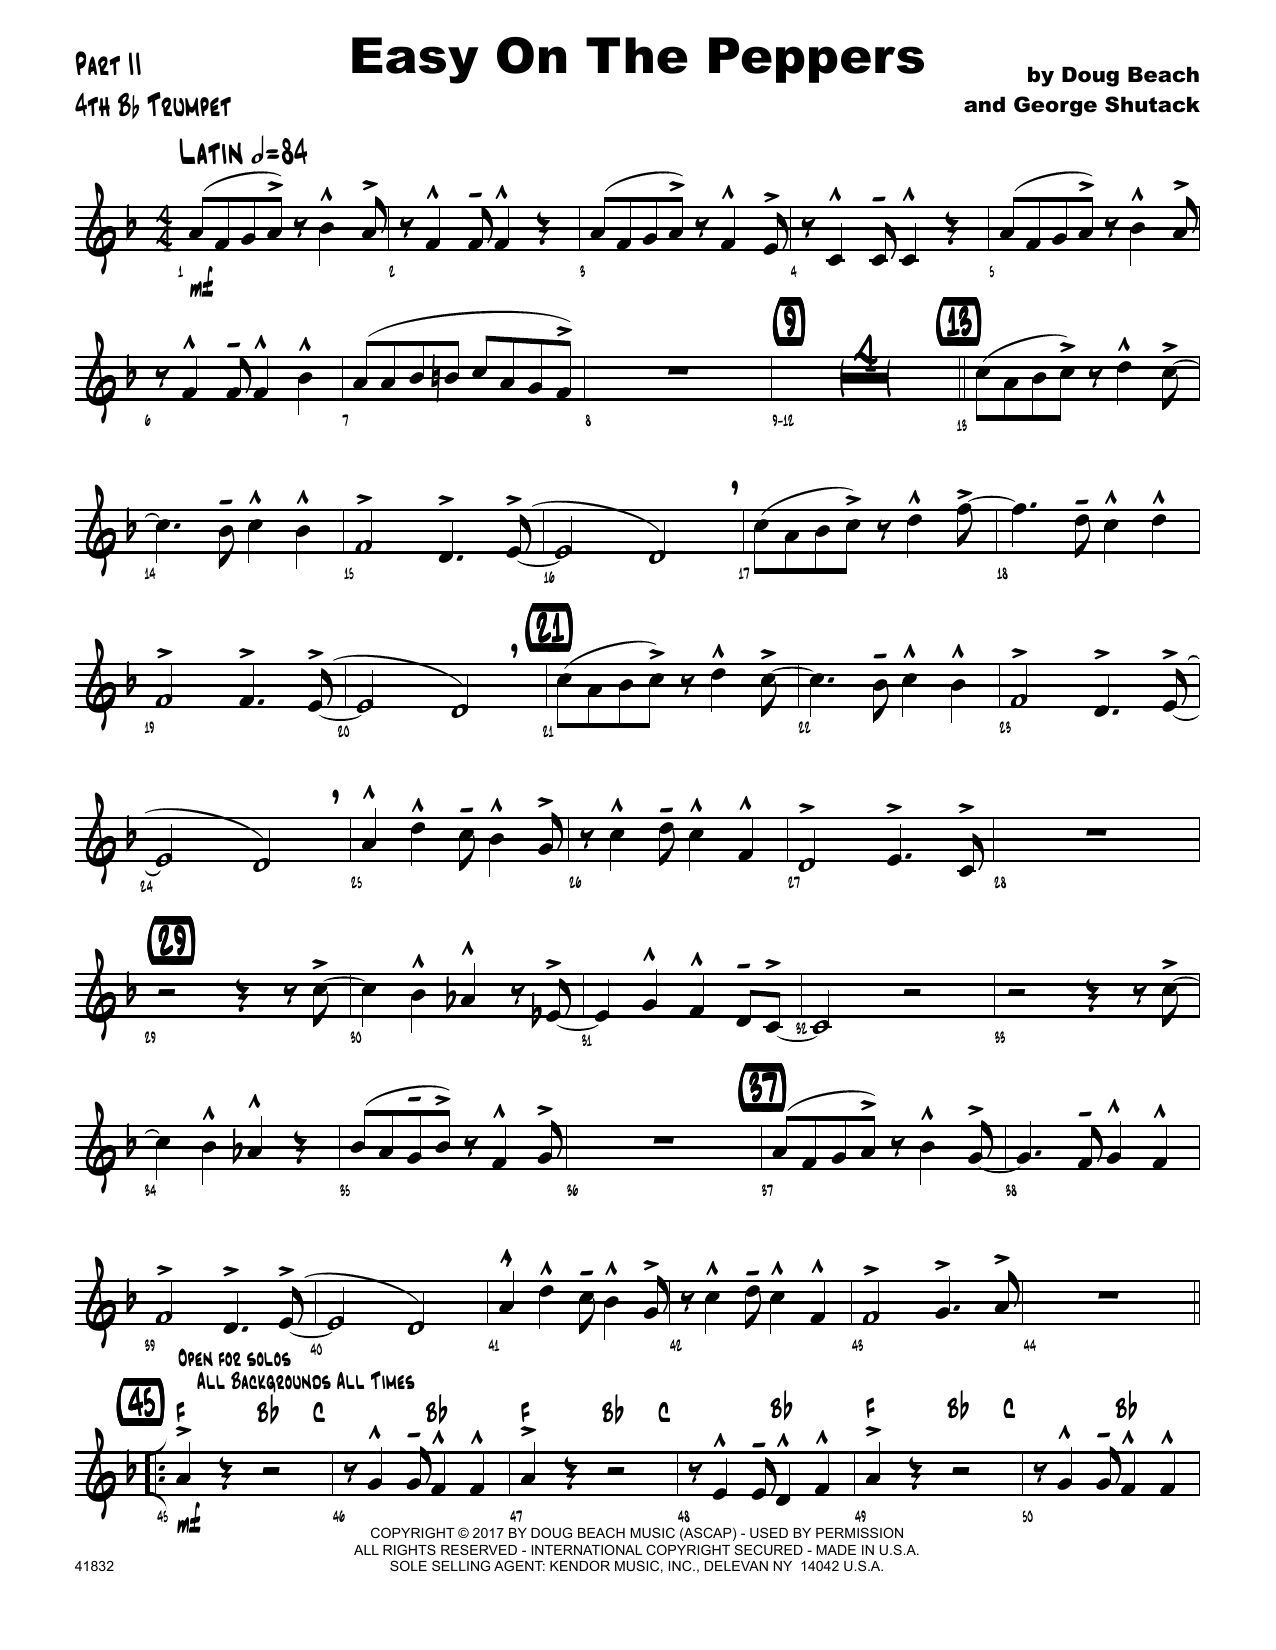 Download Doug Beach & George Shutack Easy On The Peppers - 4th Bb Trumpet Sheet Music